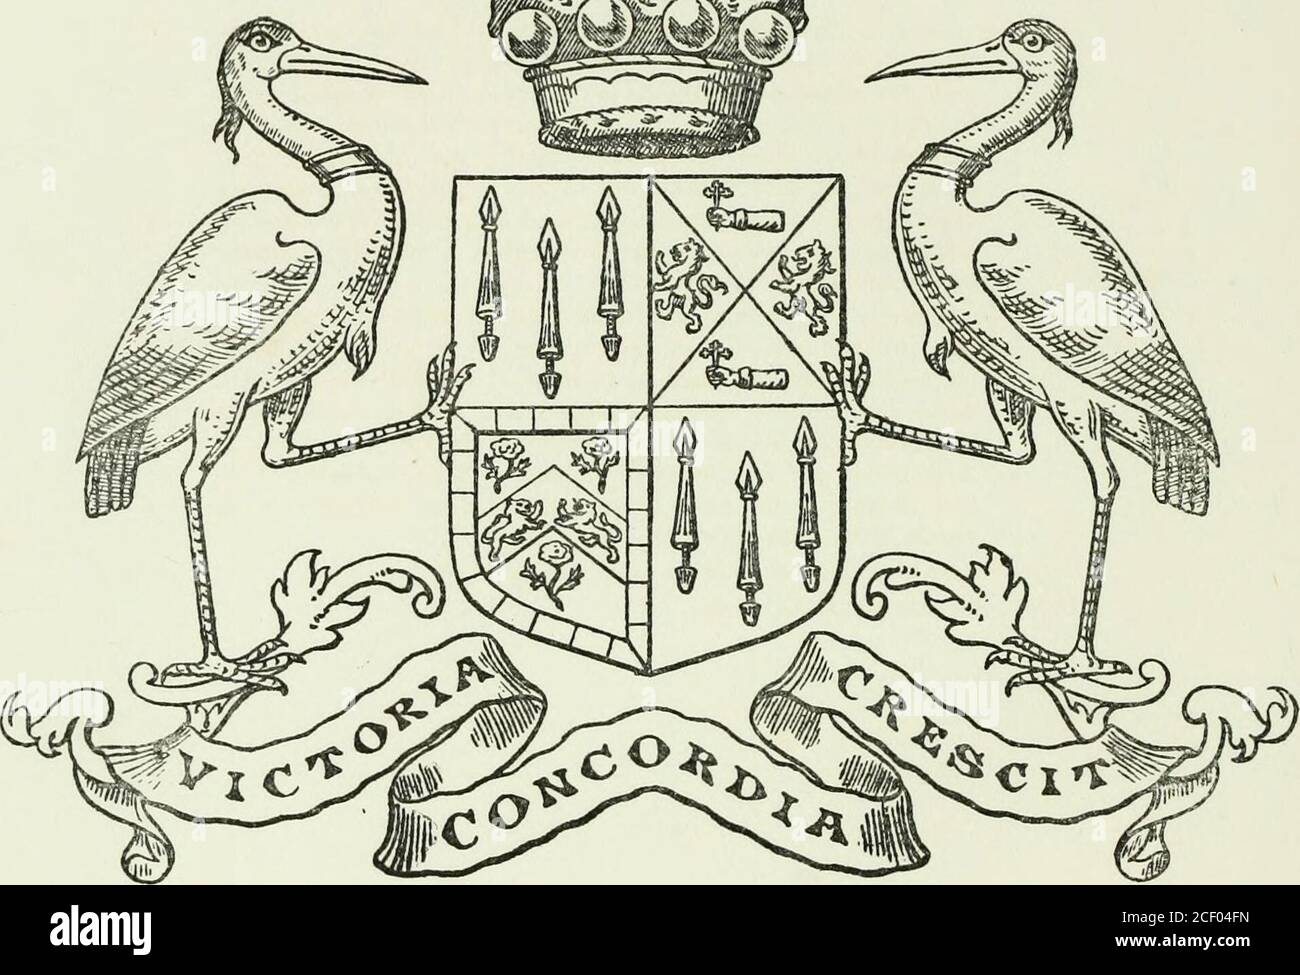 . Visitation of England and Wales. ^^ ?-v&gt;XJcts- - ^wS^- . ^P:^^^!^ ri^x:: ;^^^^gE!^^^^^m:tif^^!miKmm^:. AMHERST OF HACKNEY. Arms on record in the College of Arms.—Quarterly: ist and 4th, Gulesthree tilting spears two and one or headed argent, Amherst;2nd, Per saltire azure and or in fesse two lions rampant gulesin chief and in base a dexter arm fessewise couped at the elbowhabited of the third cuffed azure hand proper holding a cross-crosslet fitchee also of the third, Daniel ; 3rd, Or on a chevronazure between three marigolds slipped proper two lions passantrespecting each other of the fi Stock Photo